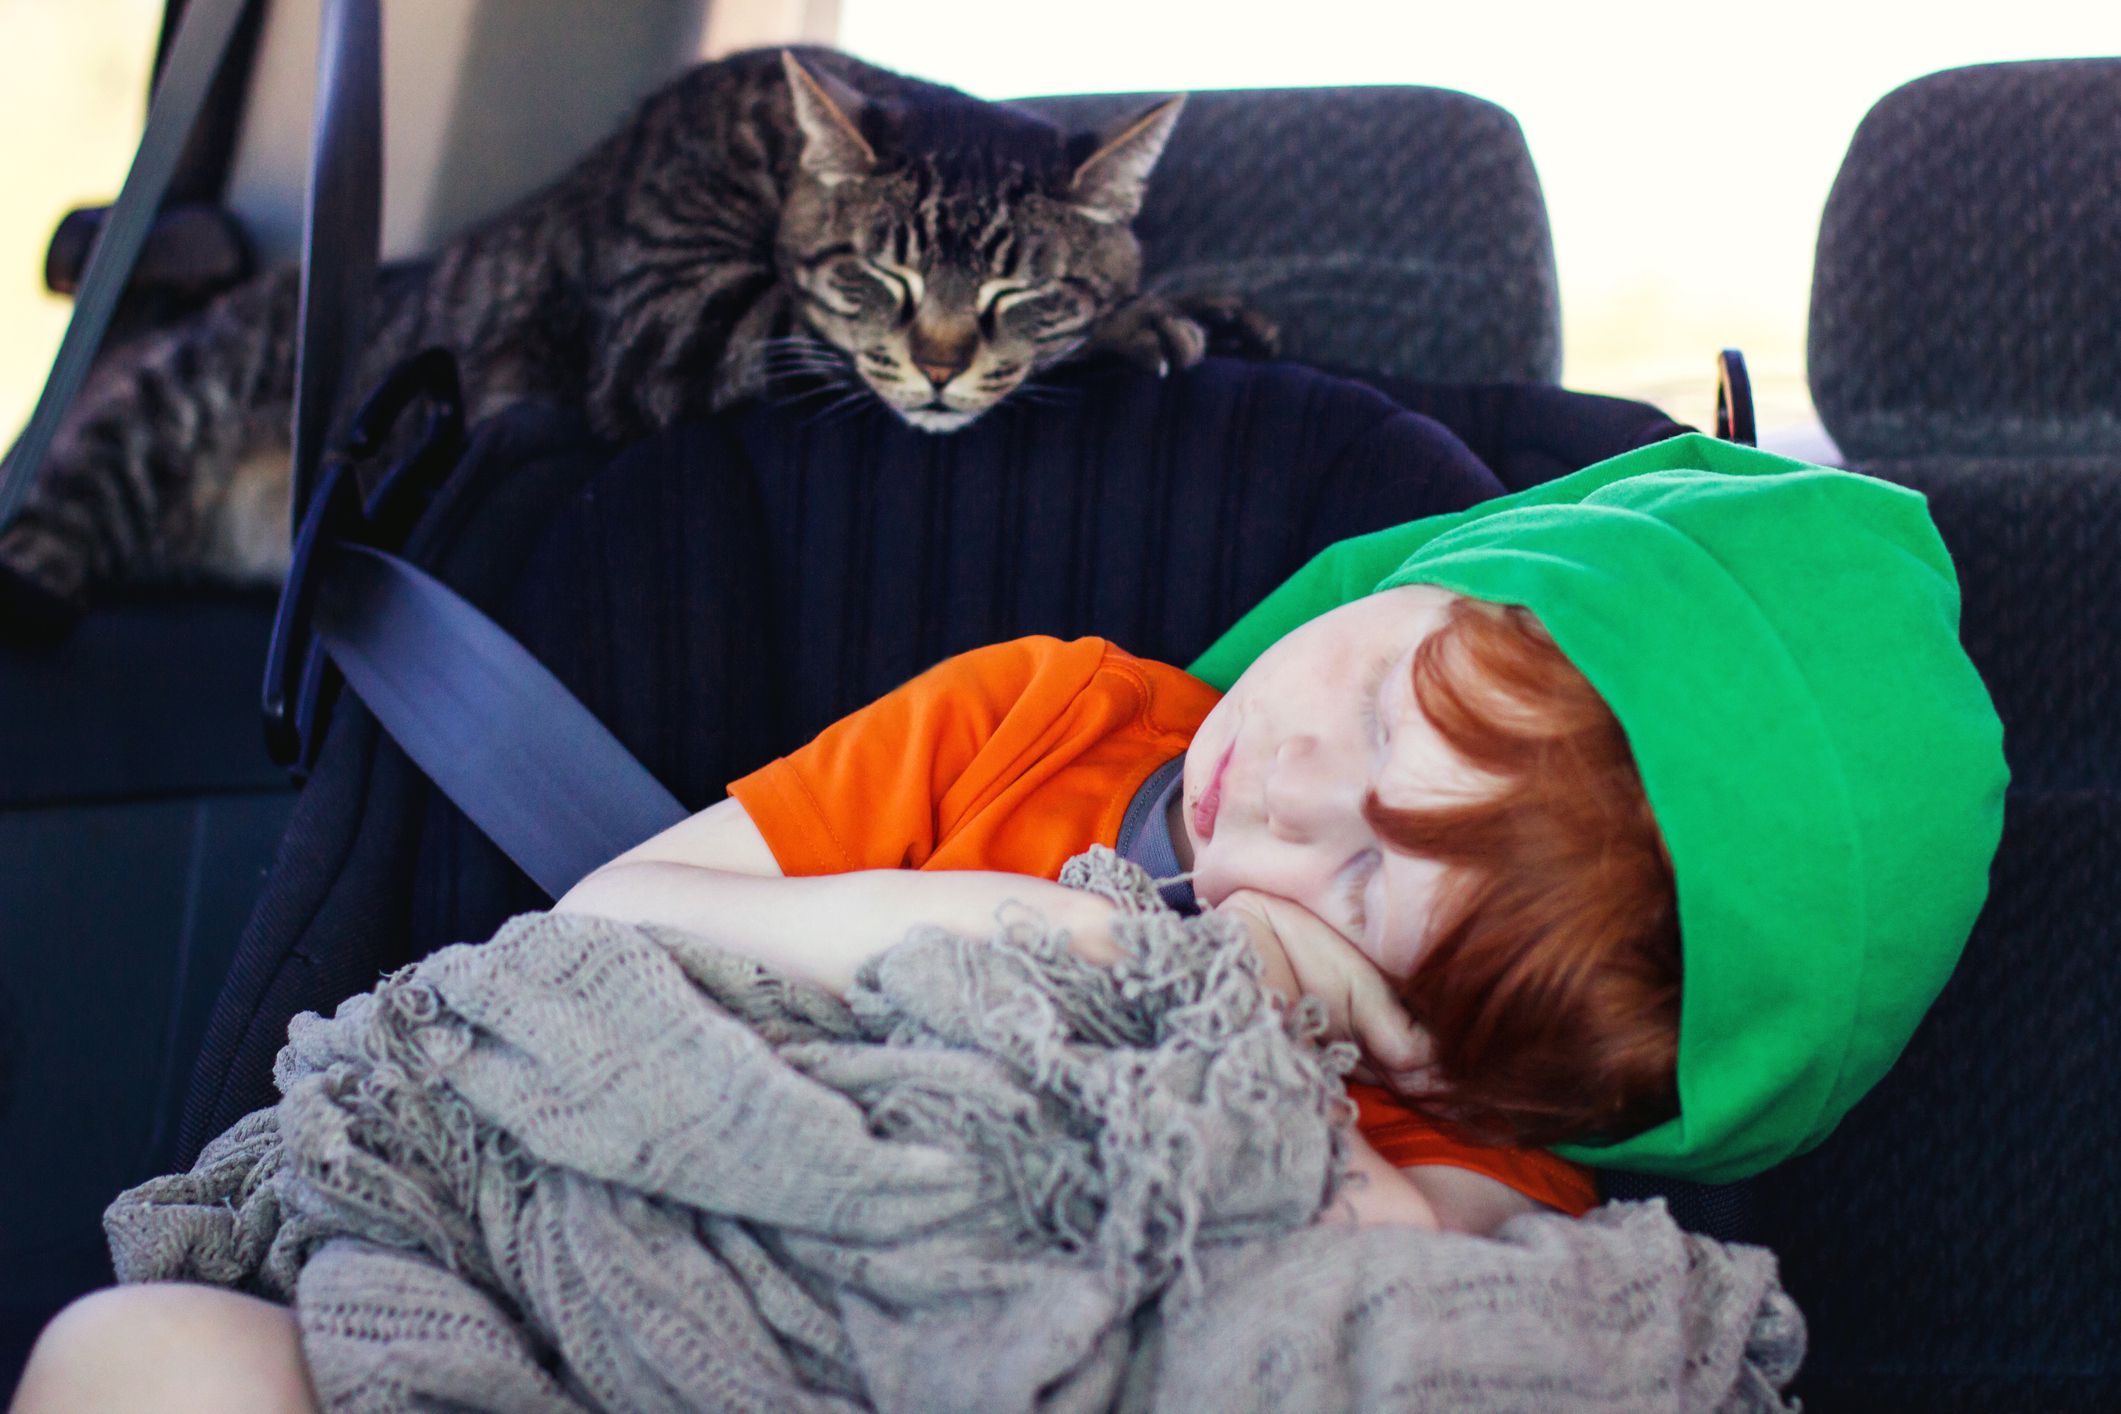 8 Tips to Make Traveling with Cats Much Easier